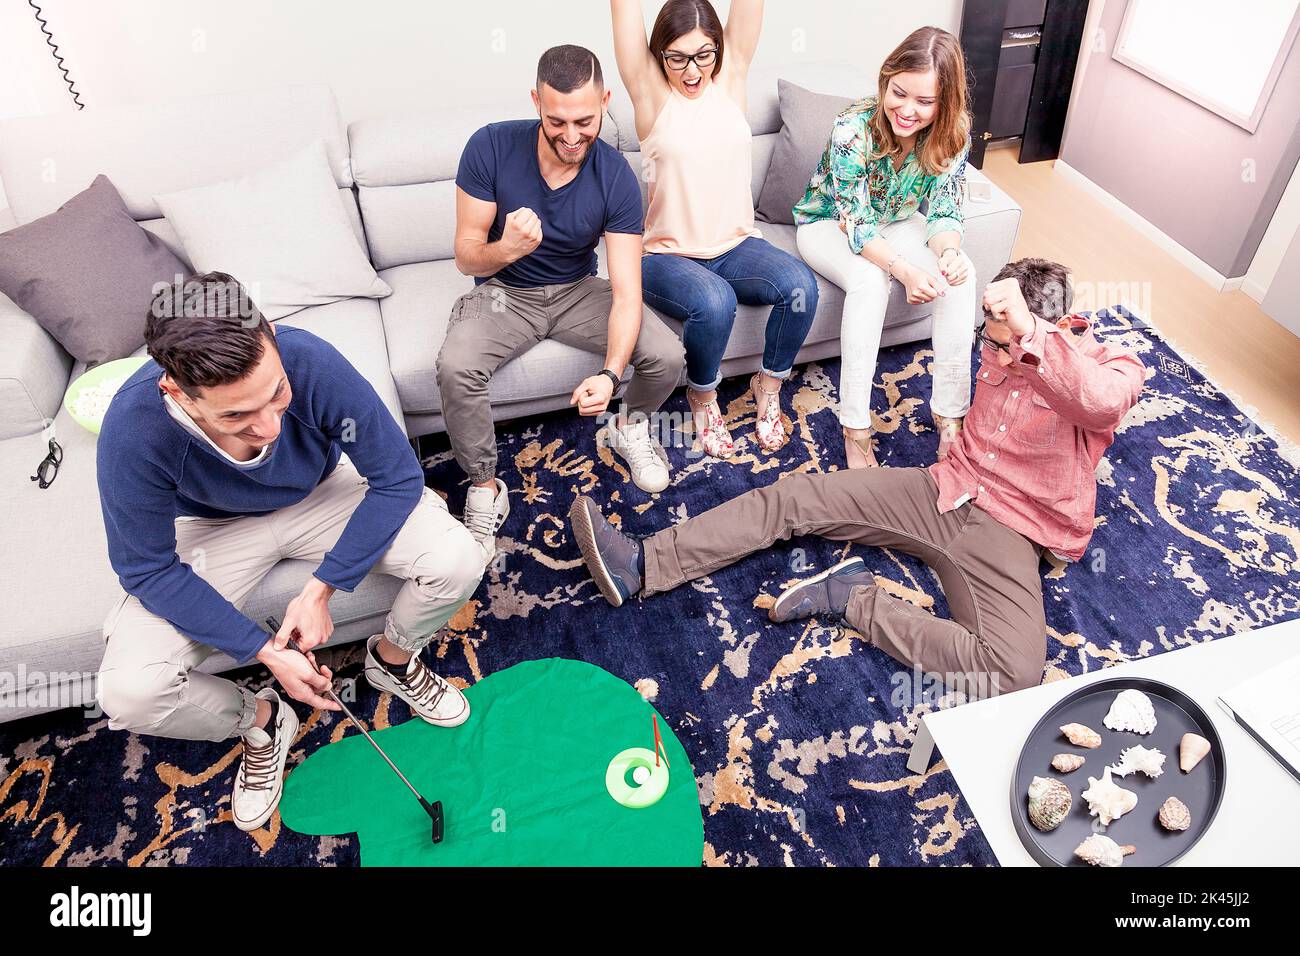 group of young adults have fun playing golf in the living room Stock Photo